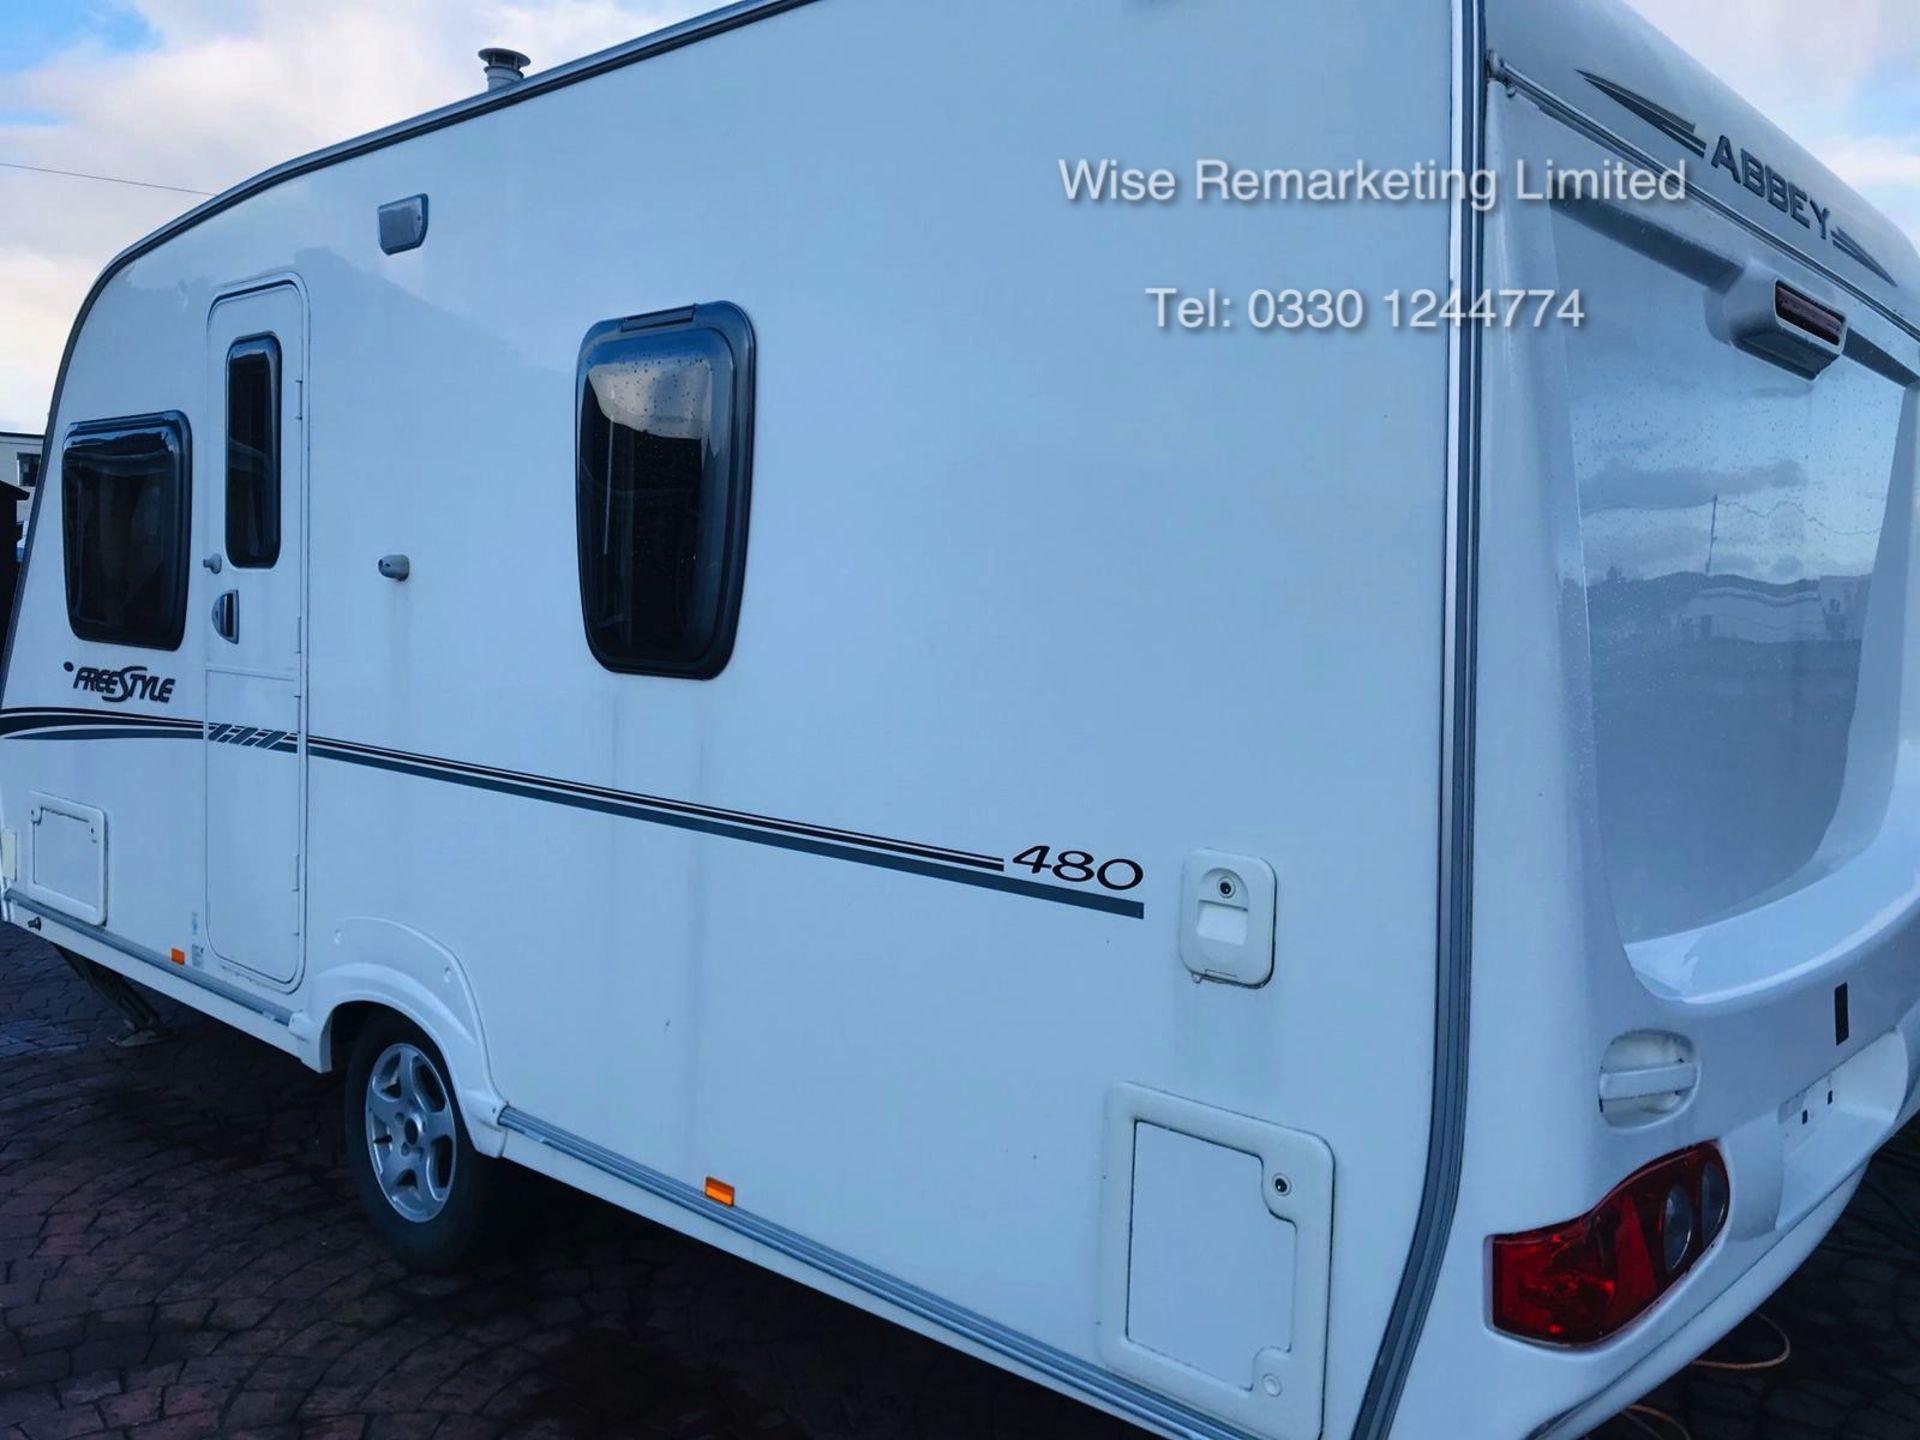 (RESERVE MET) Swift Abbey Freestyle 480 (4 Berth) Caravan - 2008 Model - 1 Former Keeper From New - Image 4 of 32